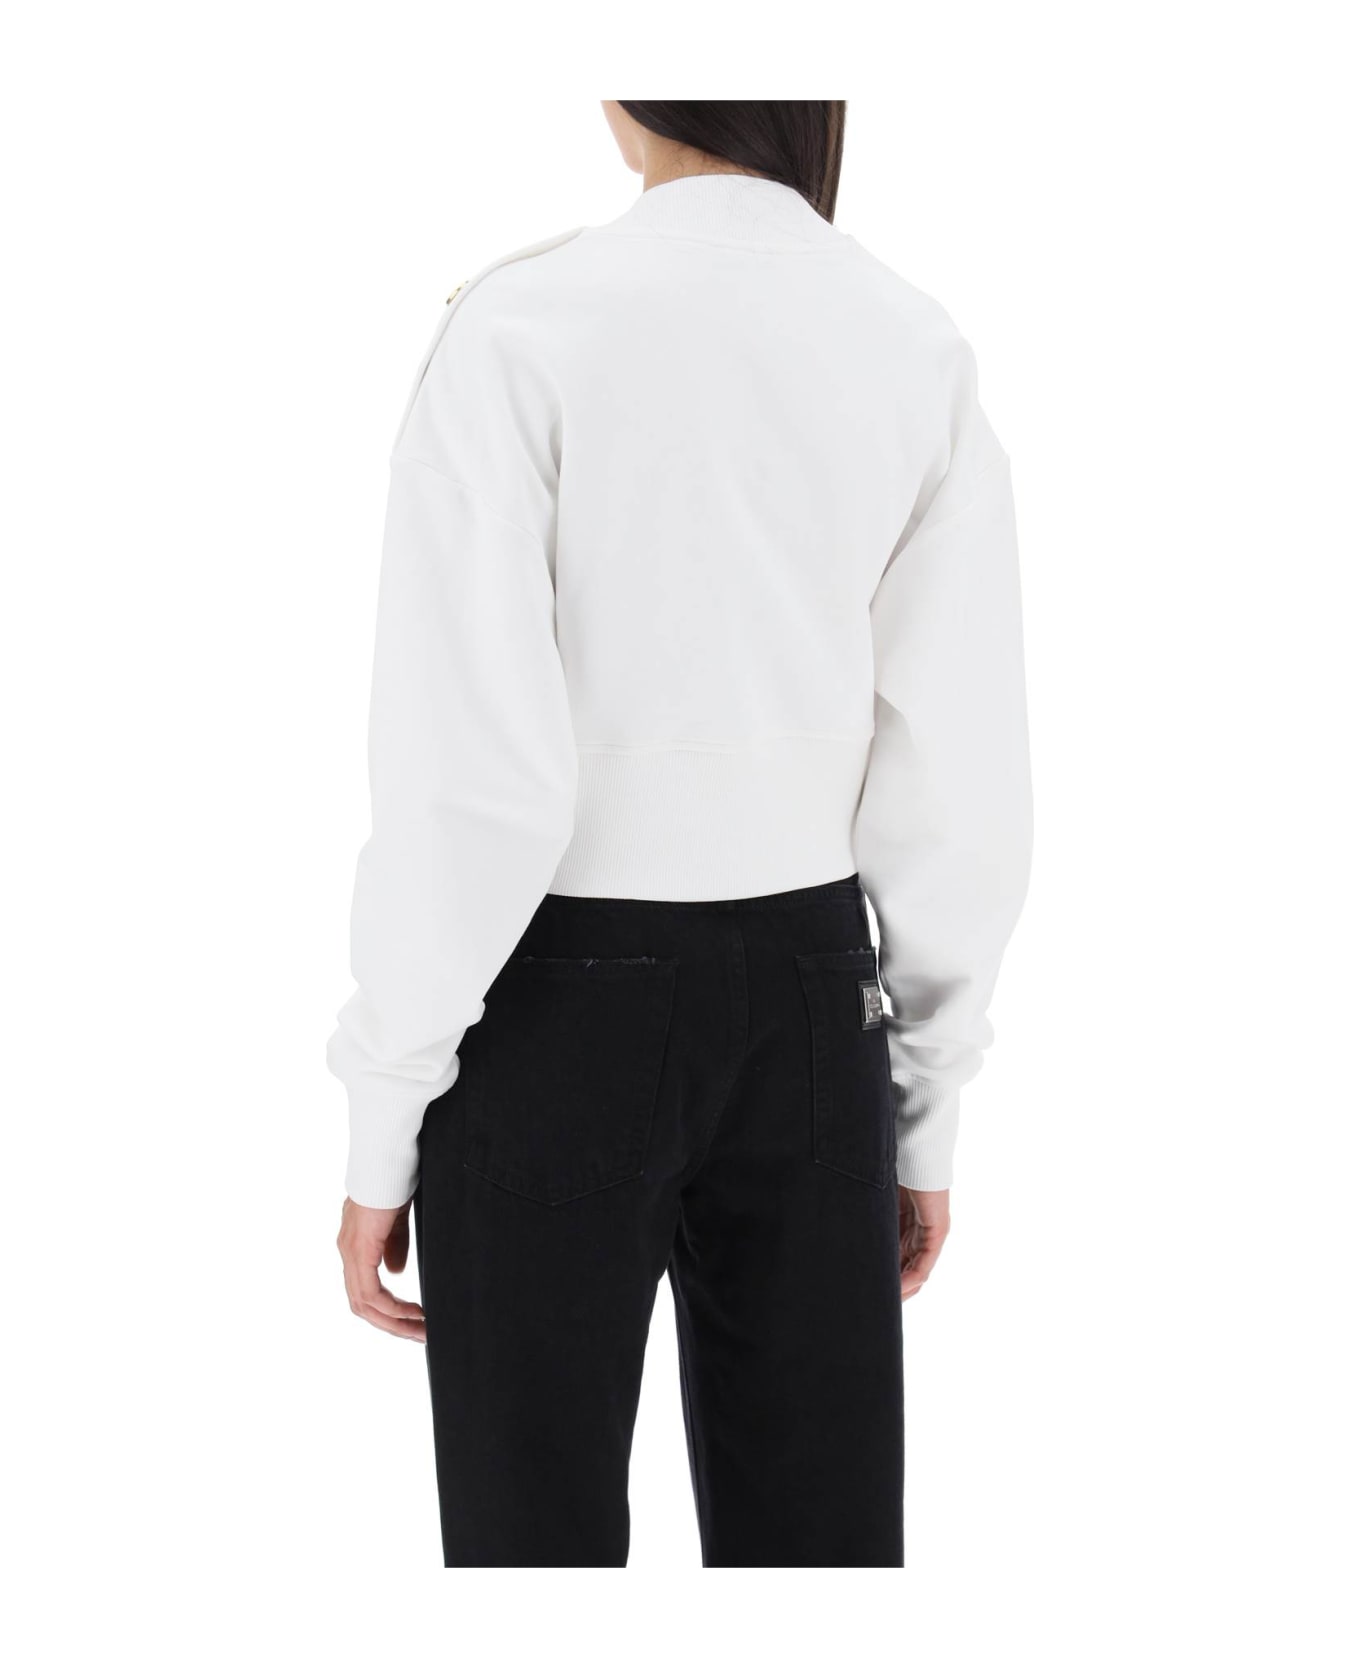 Balmain Cropped Sweatshirt With Logo Print And Buttons - White ニットウェア